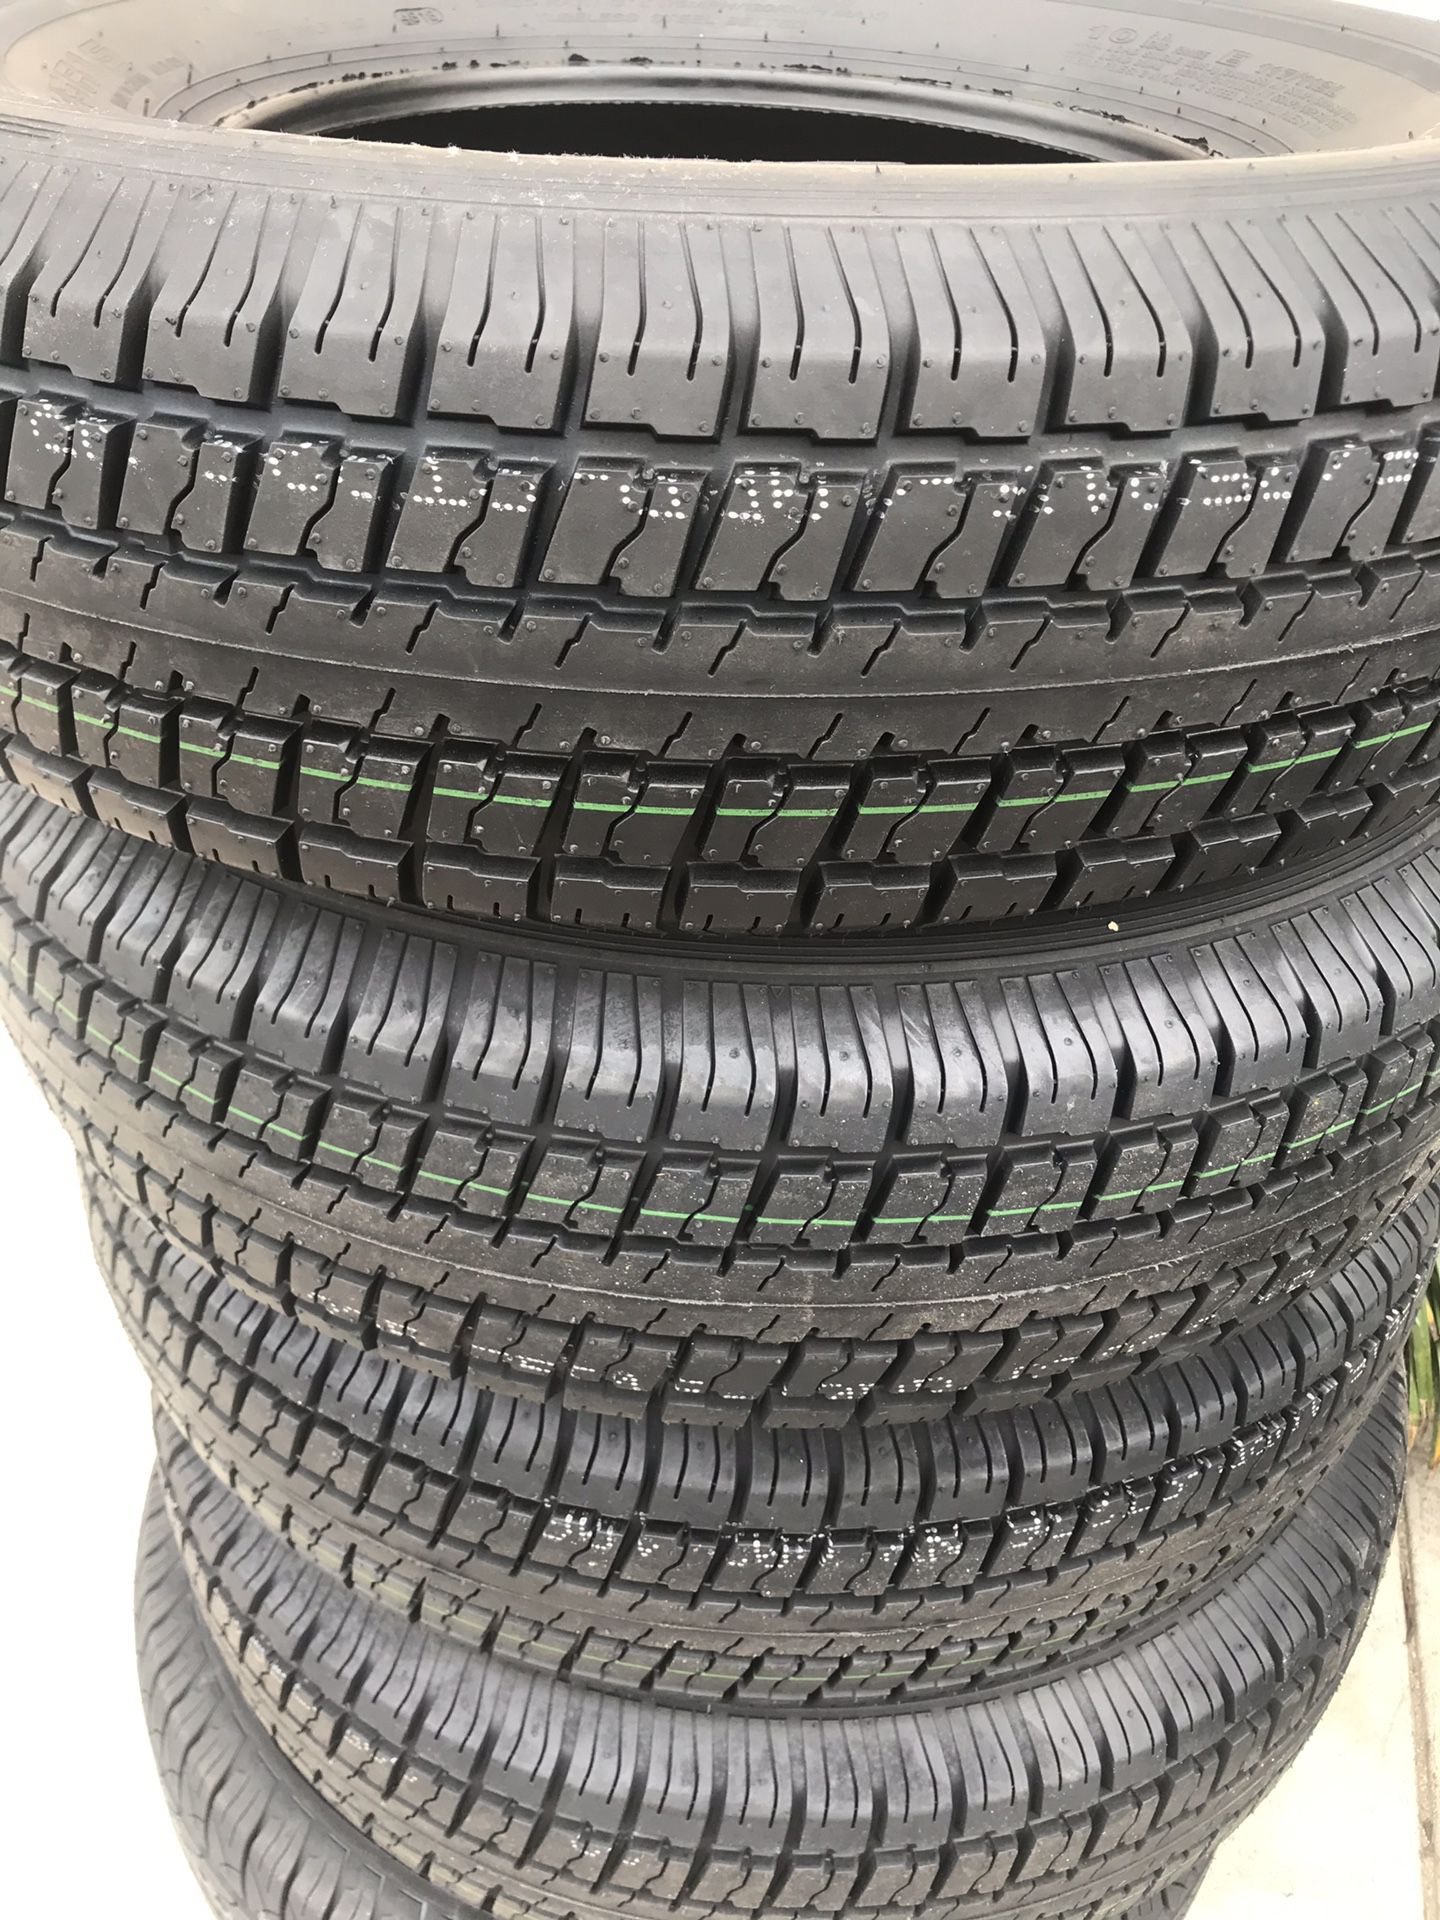 4x trailer tire 225x75 -15 10 ply $255 price firm no bargain